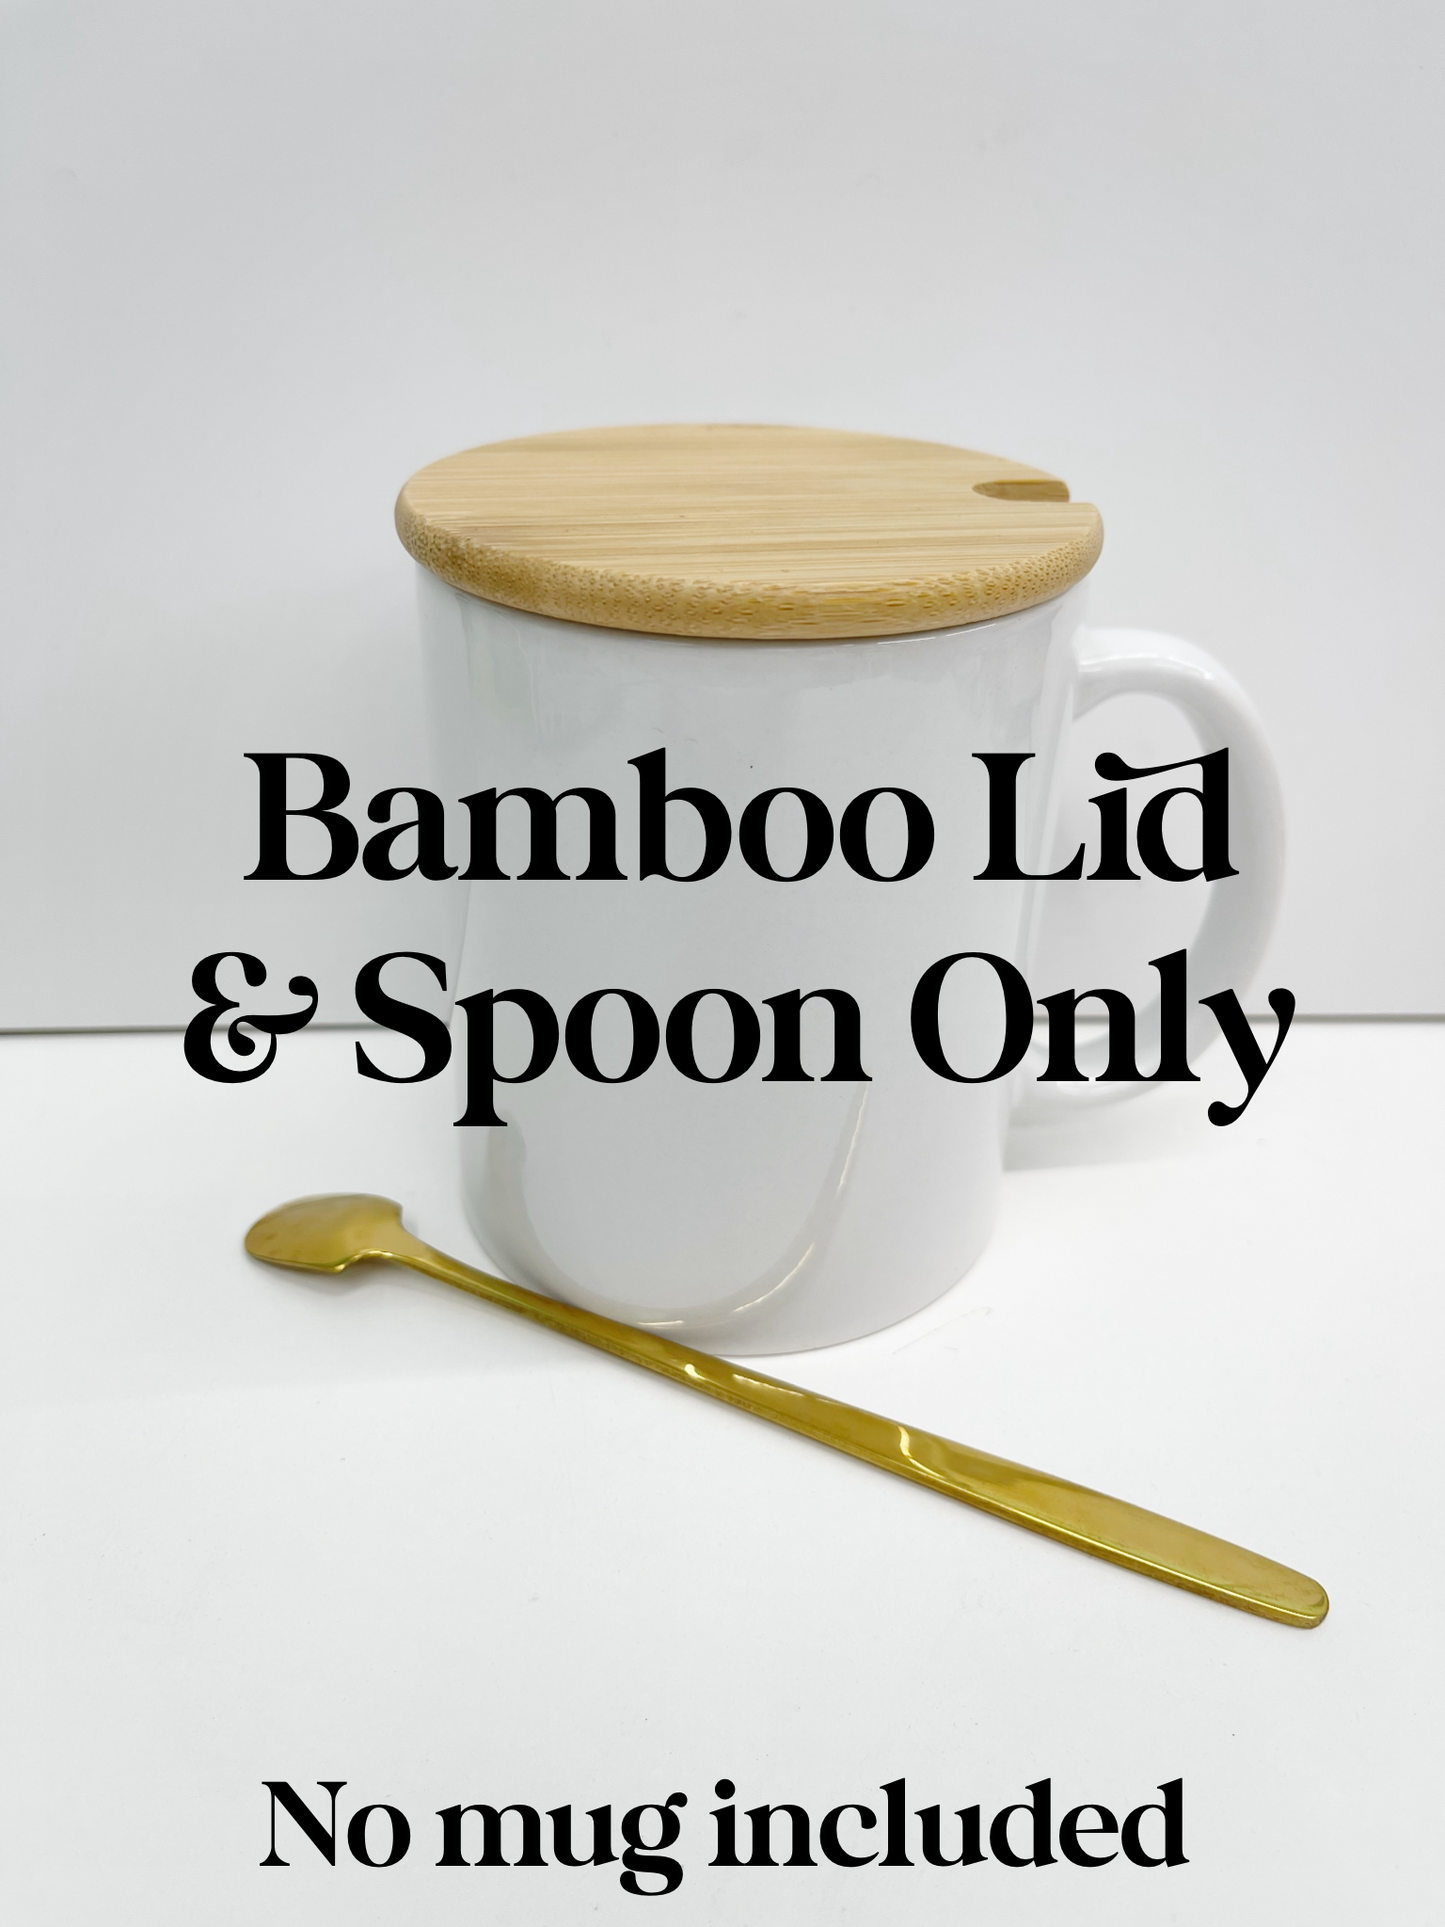 Bamboo Lid & Spoon ONLY for 11 oz mug